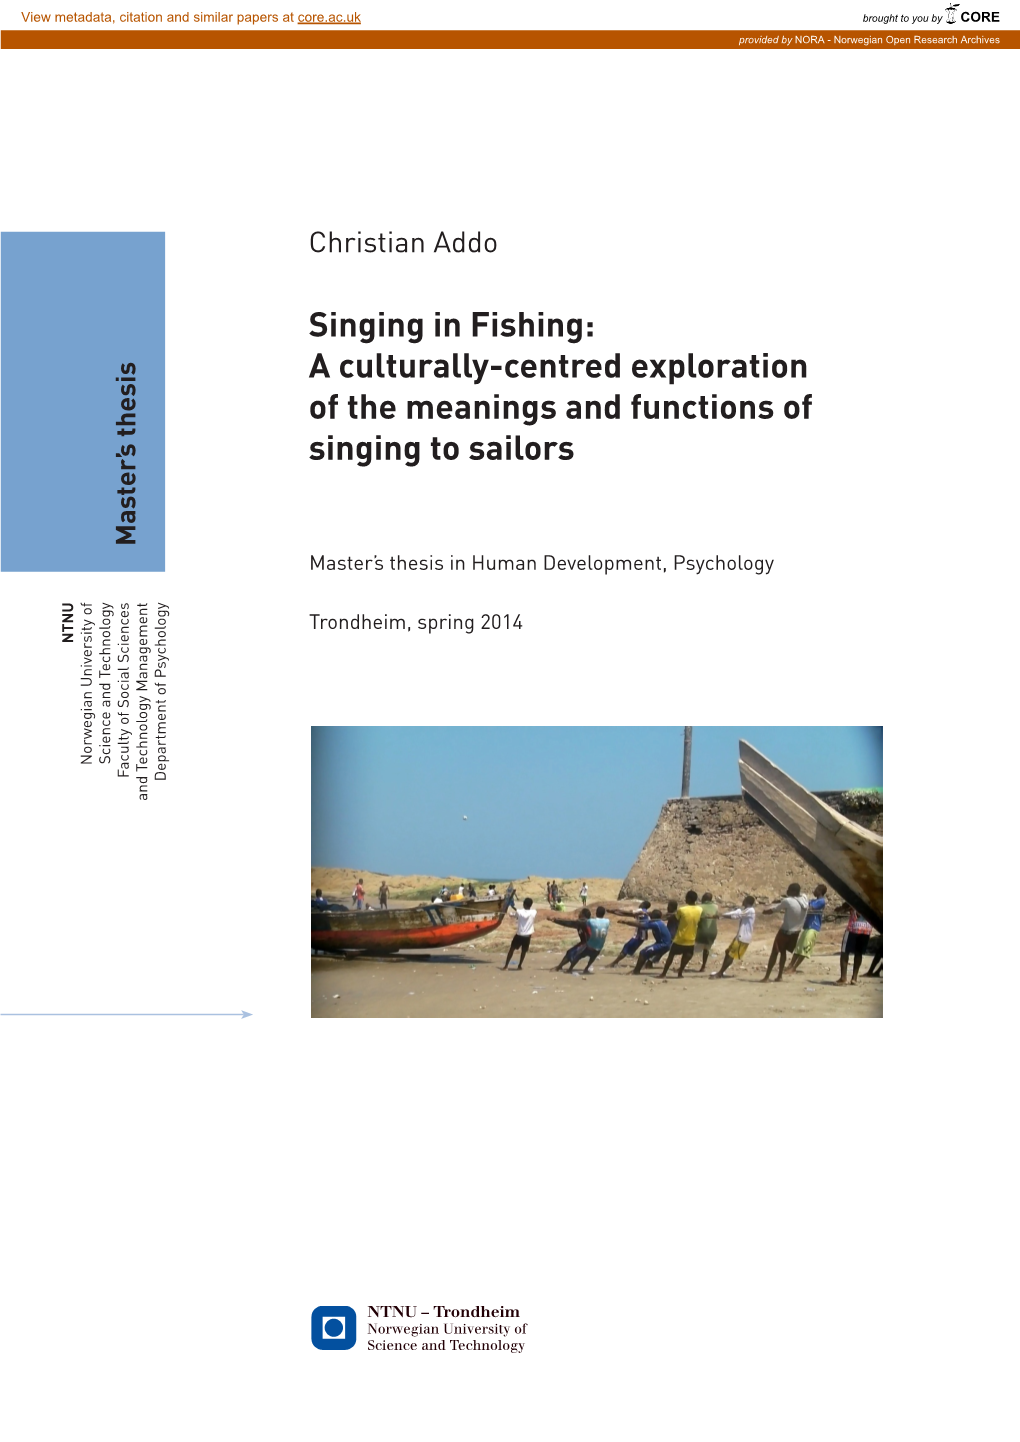 A Culturally-Centred Exploration of the Meanings and Functions of Singing